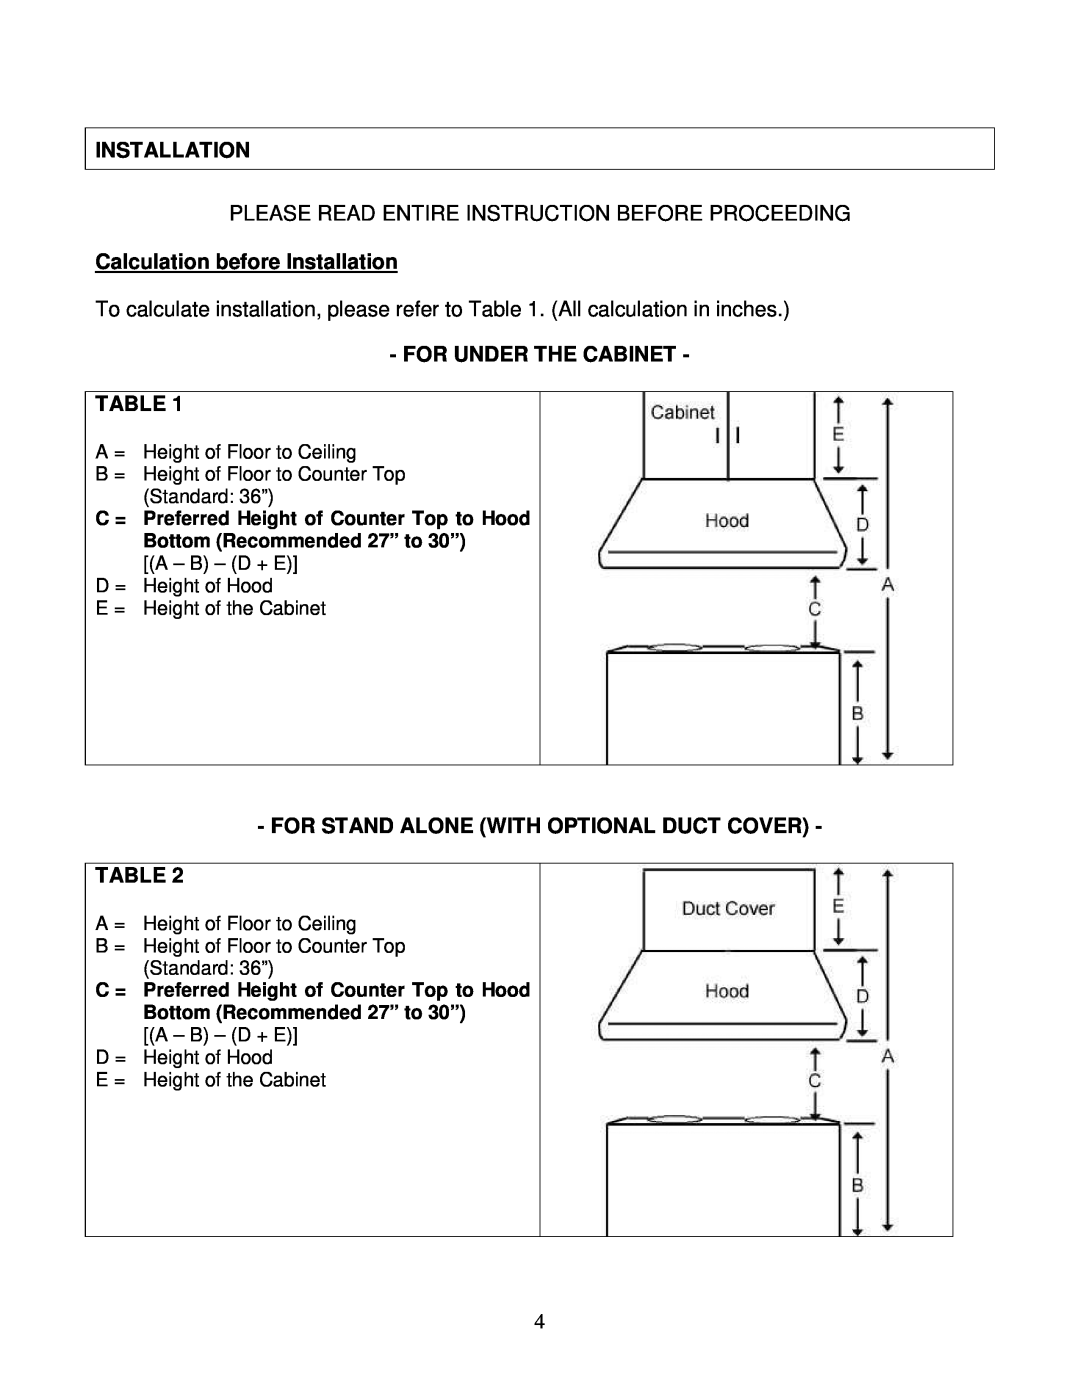 Kobe Range Hoods CH0148SQB (48") Calculation before Installation, For Under The Cabinet, Bottom Recommended 27” to 30” 